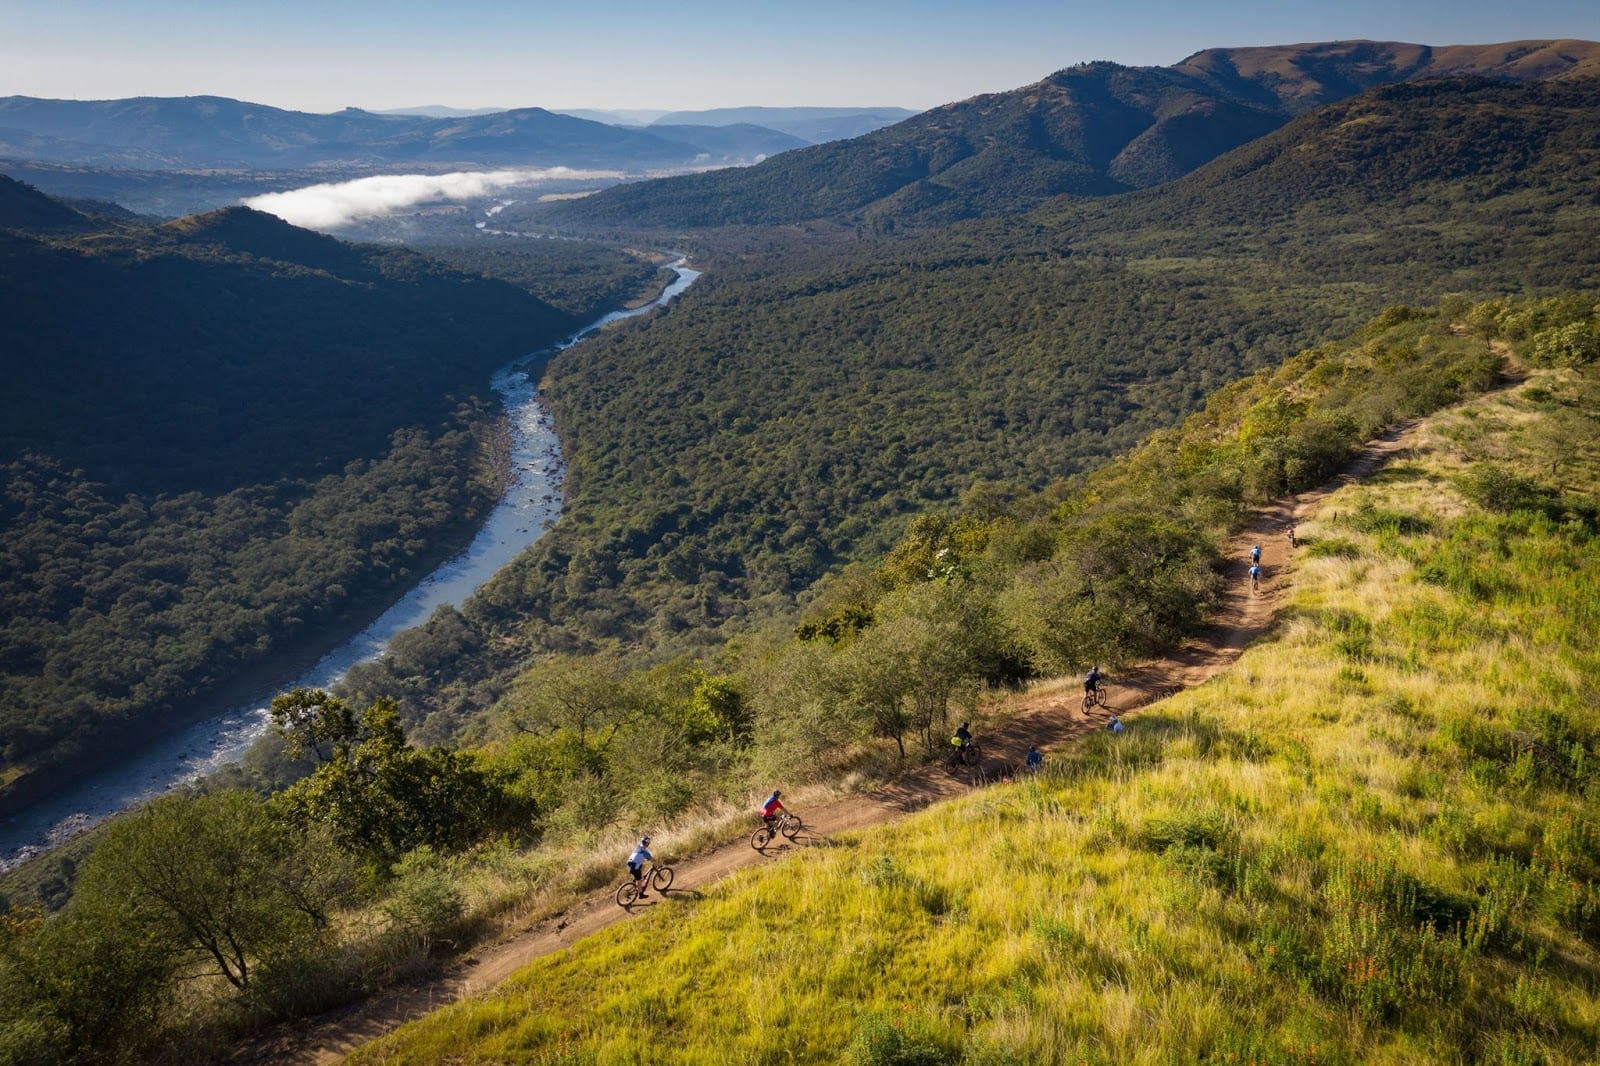 What Makes the sani2c Worth Coming Back For Every Year?